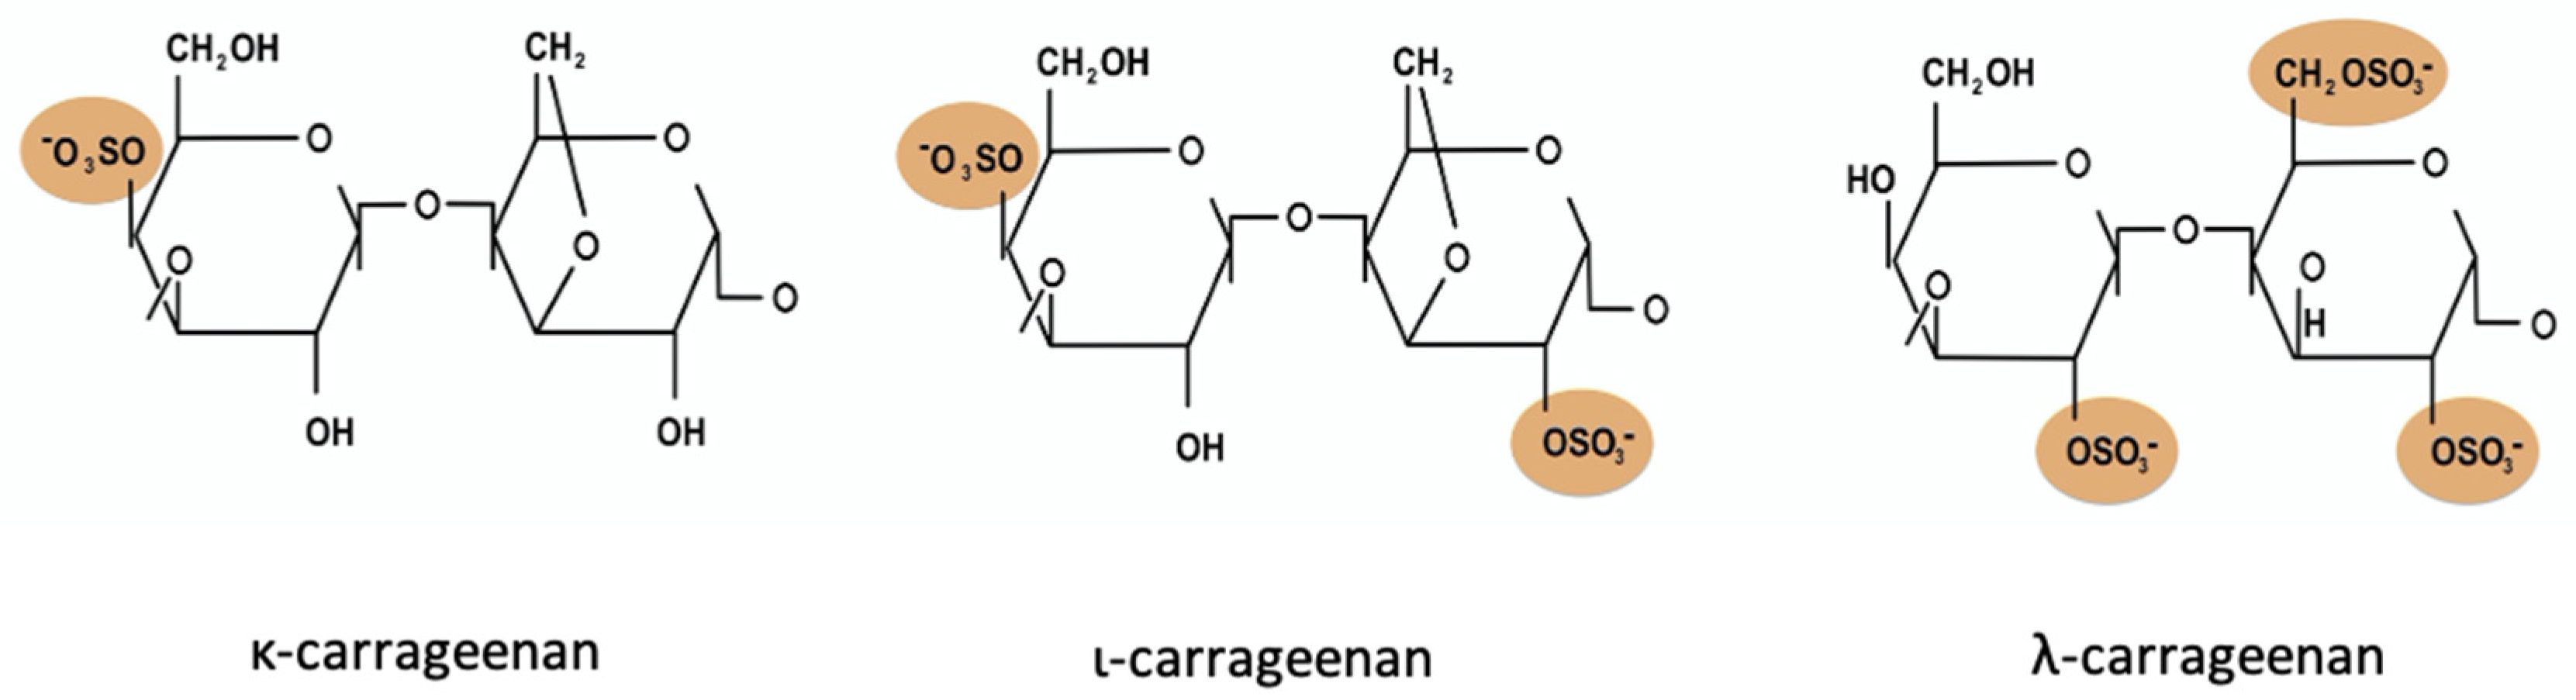 Frontiers  The Role of Carrageenan and Carboxymethylcellulose in the  Development of Intestinal Inflammation